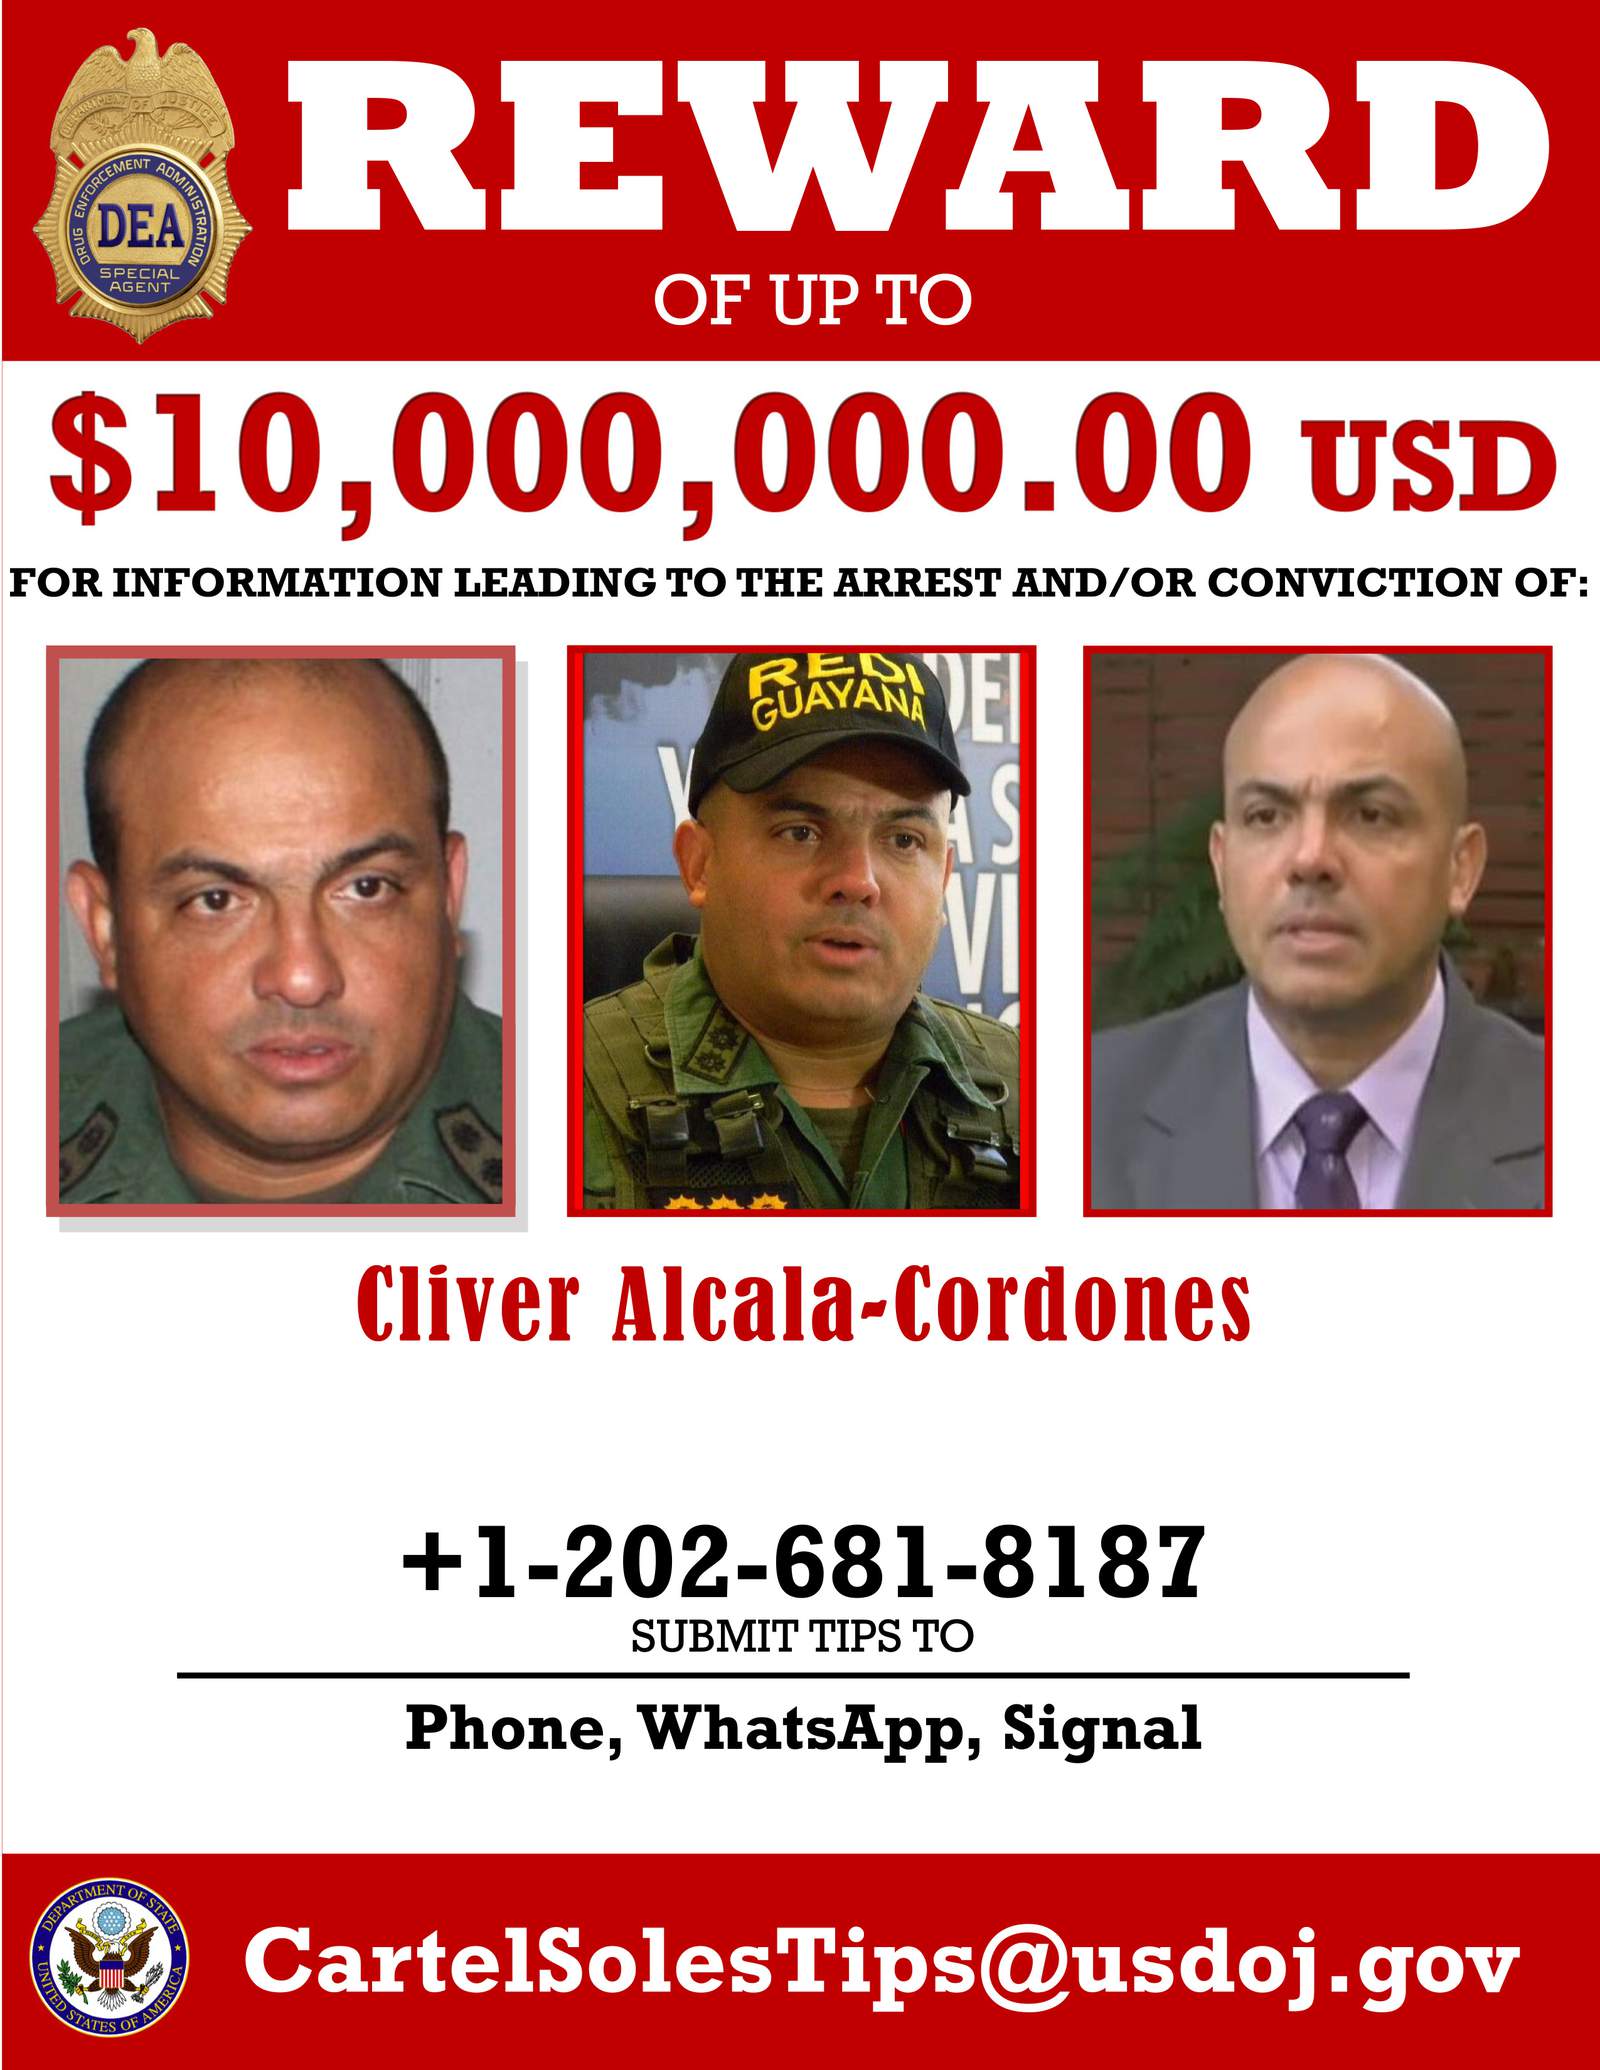 AP Sources: Alleged Maduro co-conspirator is in DEA custody